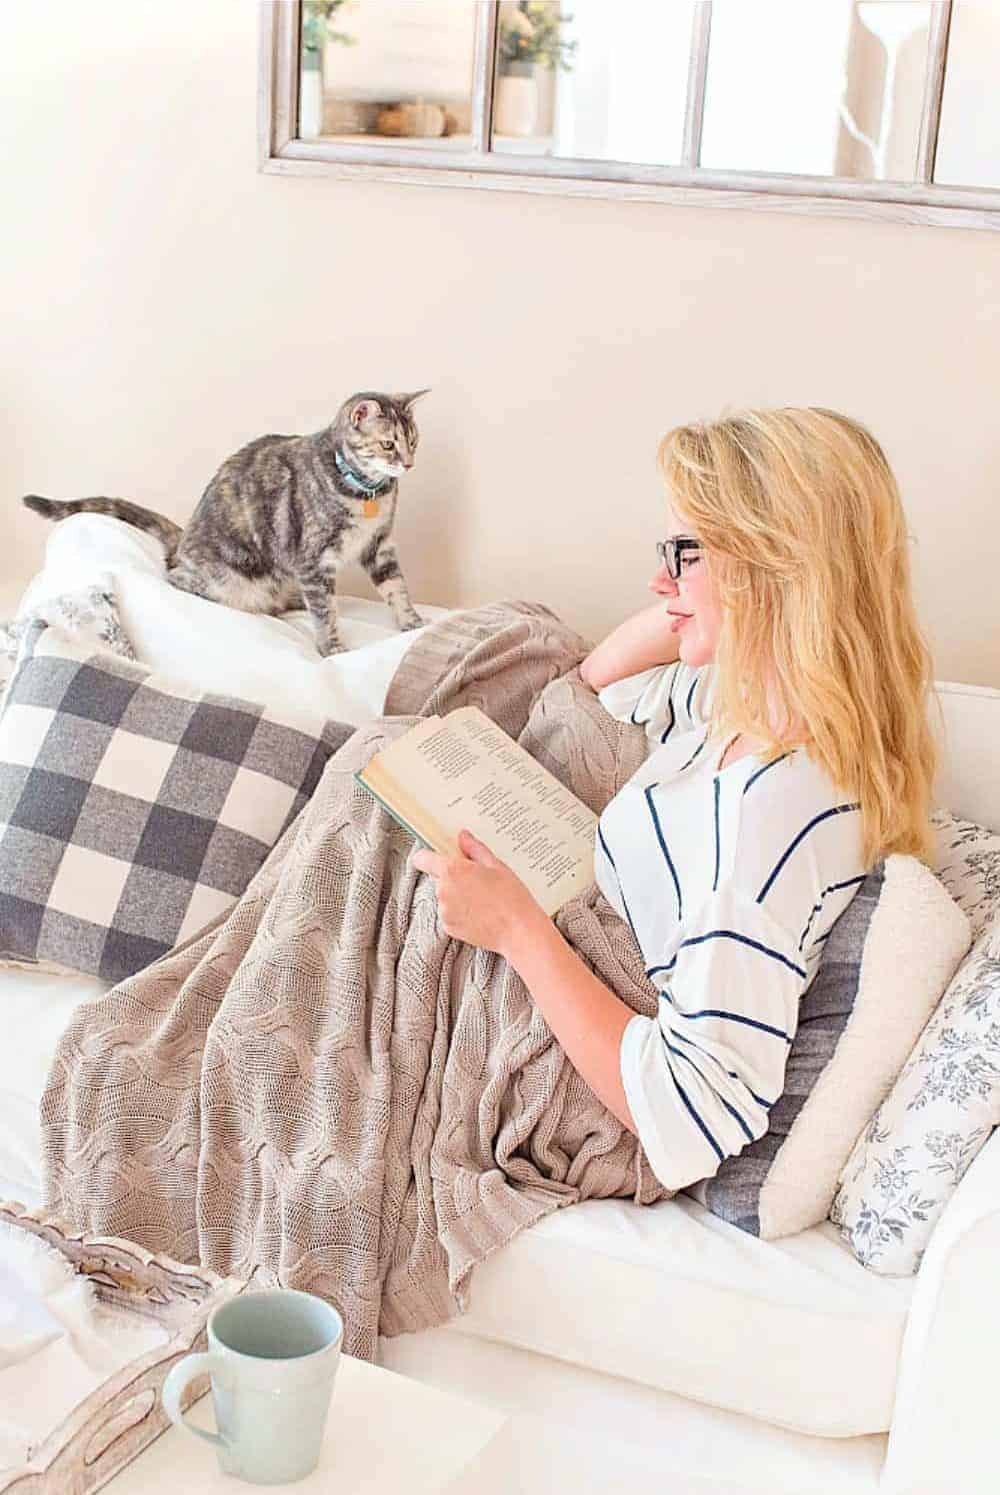 A lifestyle blogger at home with her cat